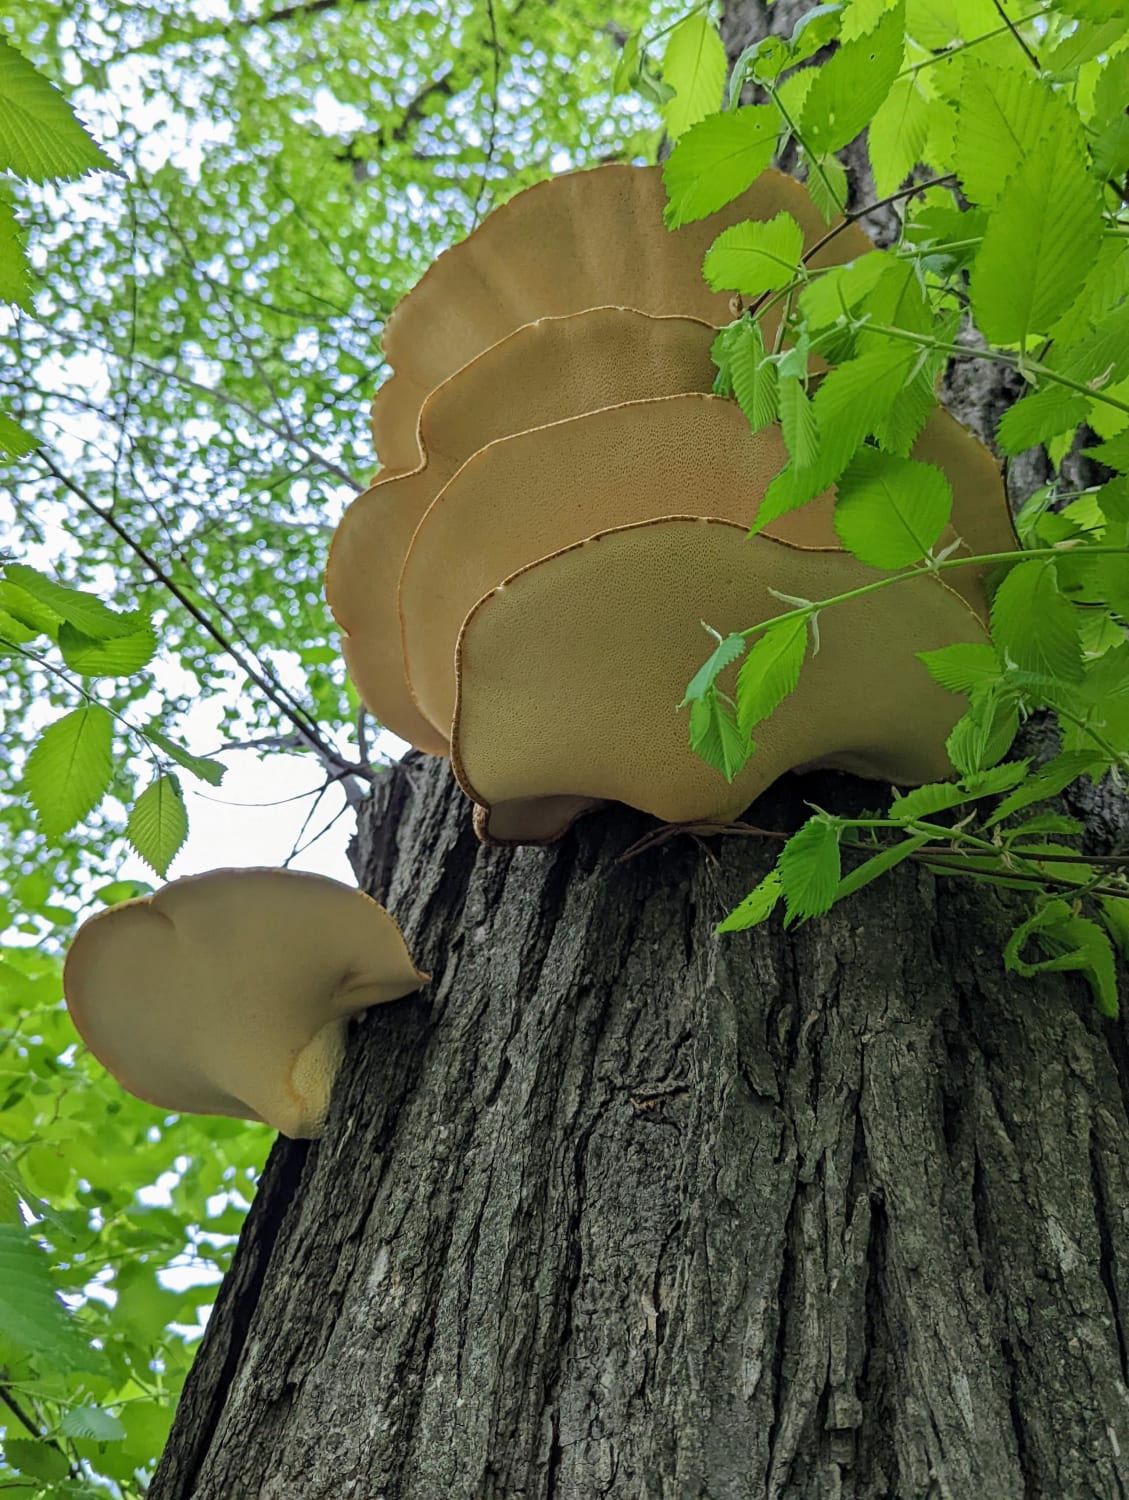 Dryad’s Saddle? Some kind of bracket fungus anyway. Grant Park, Chicago